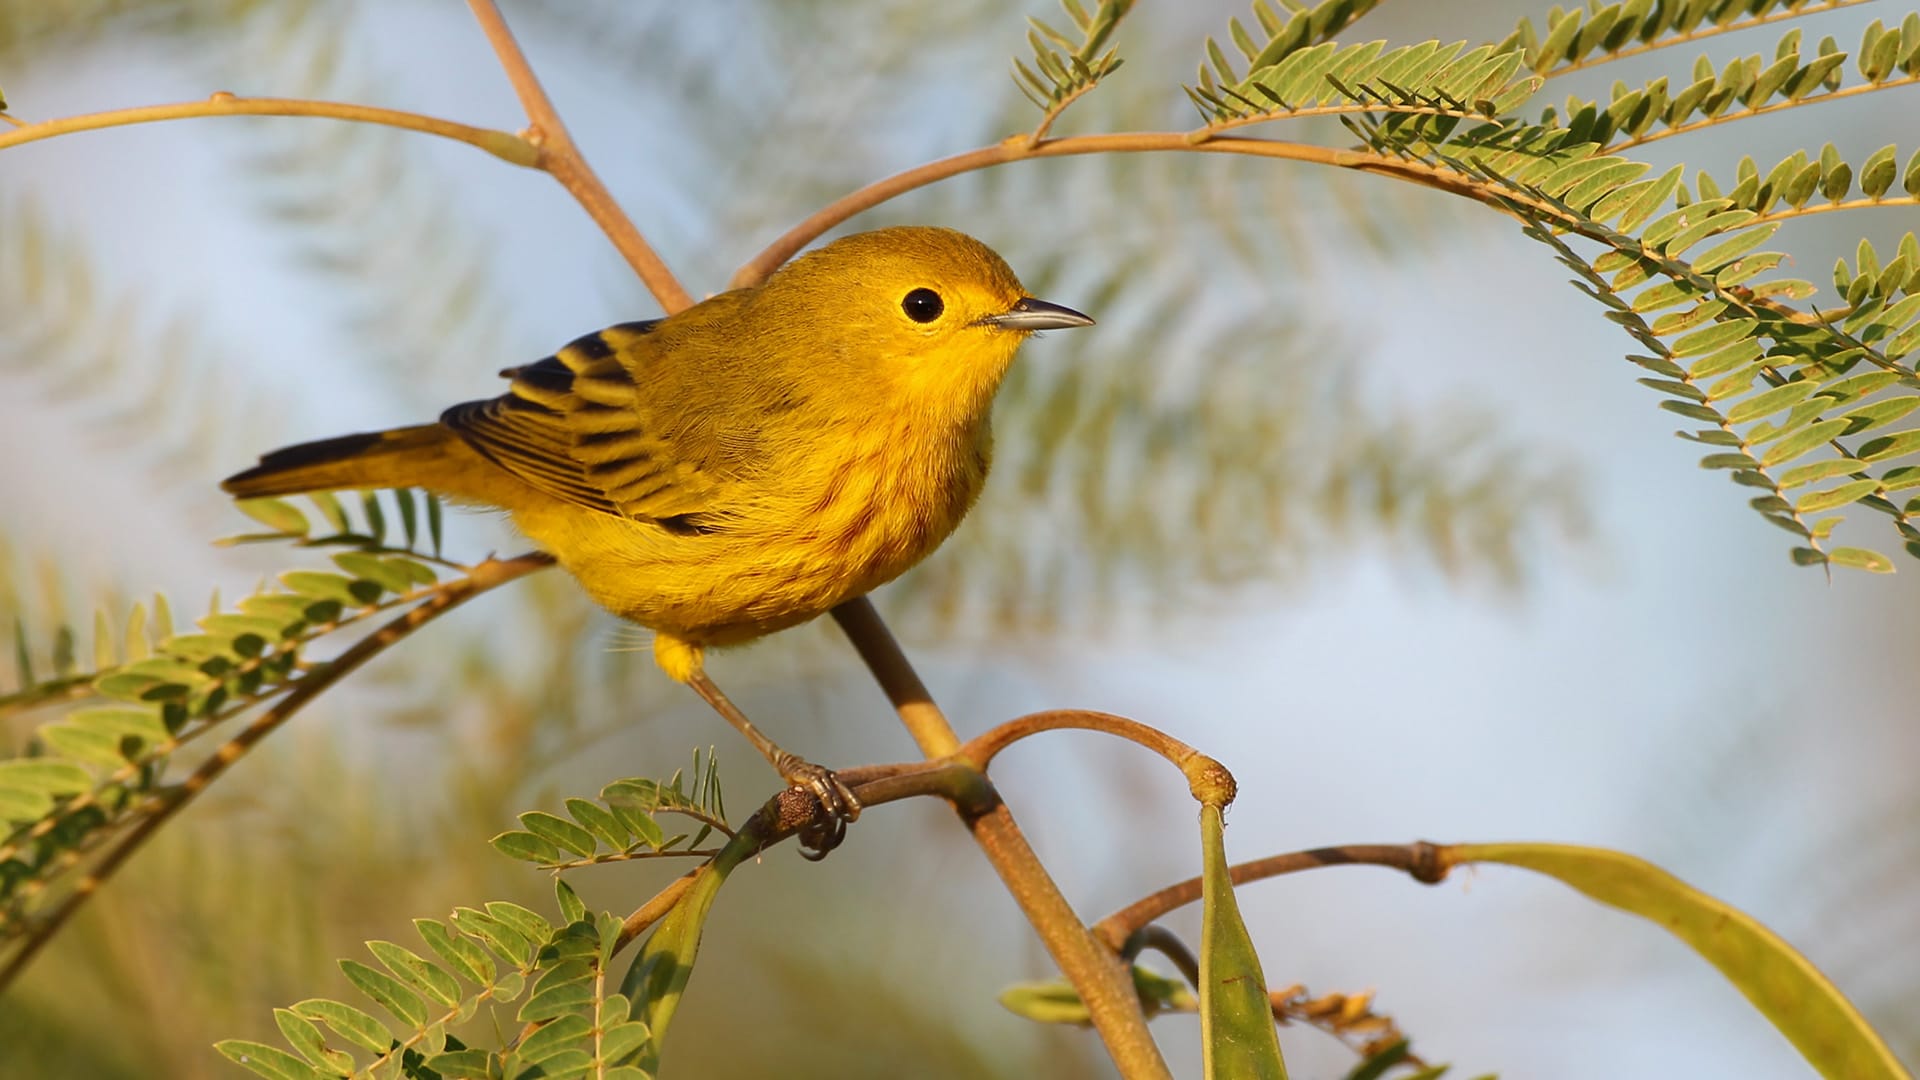 warbler on a branch